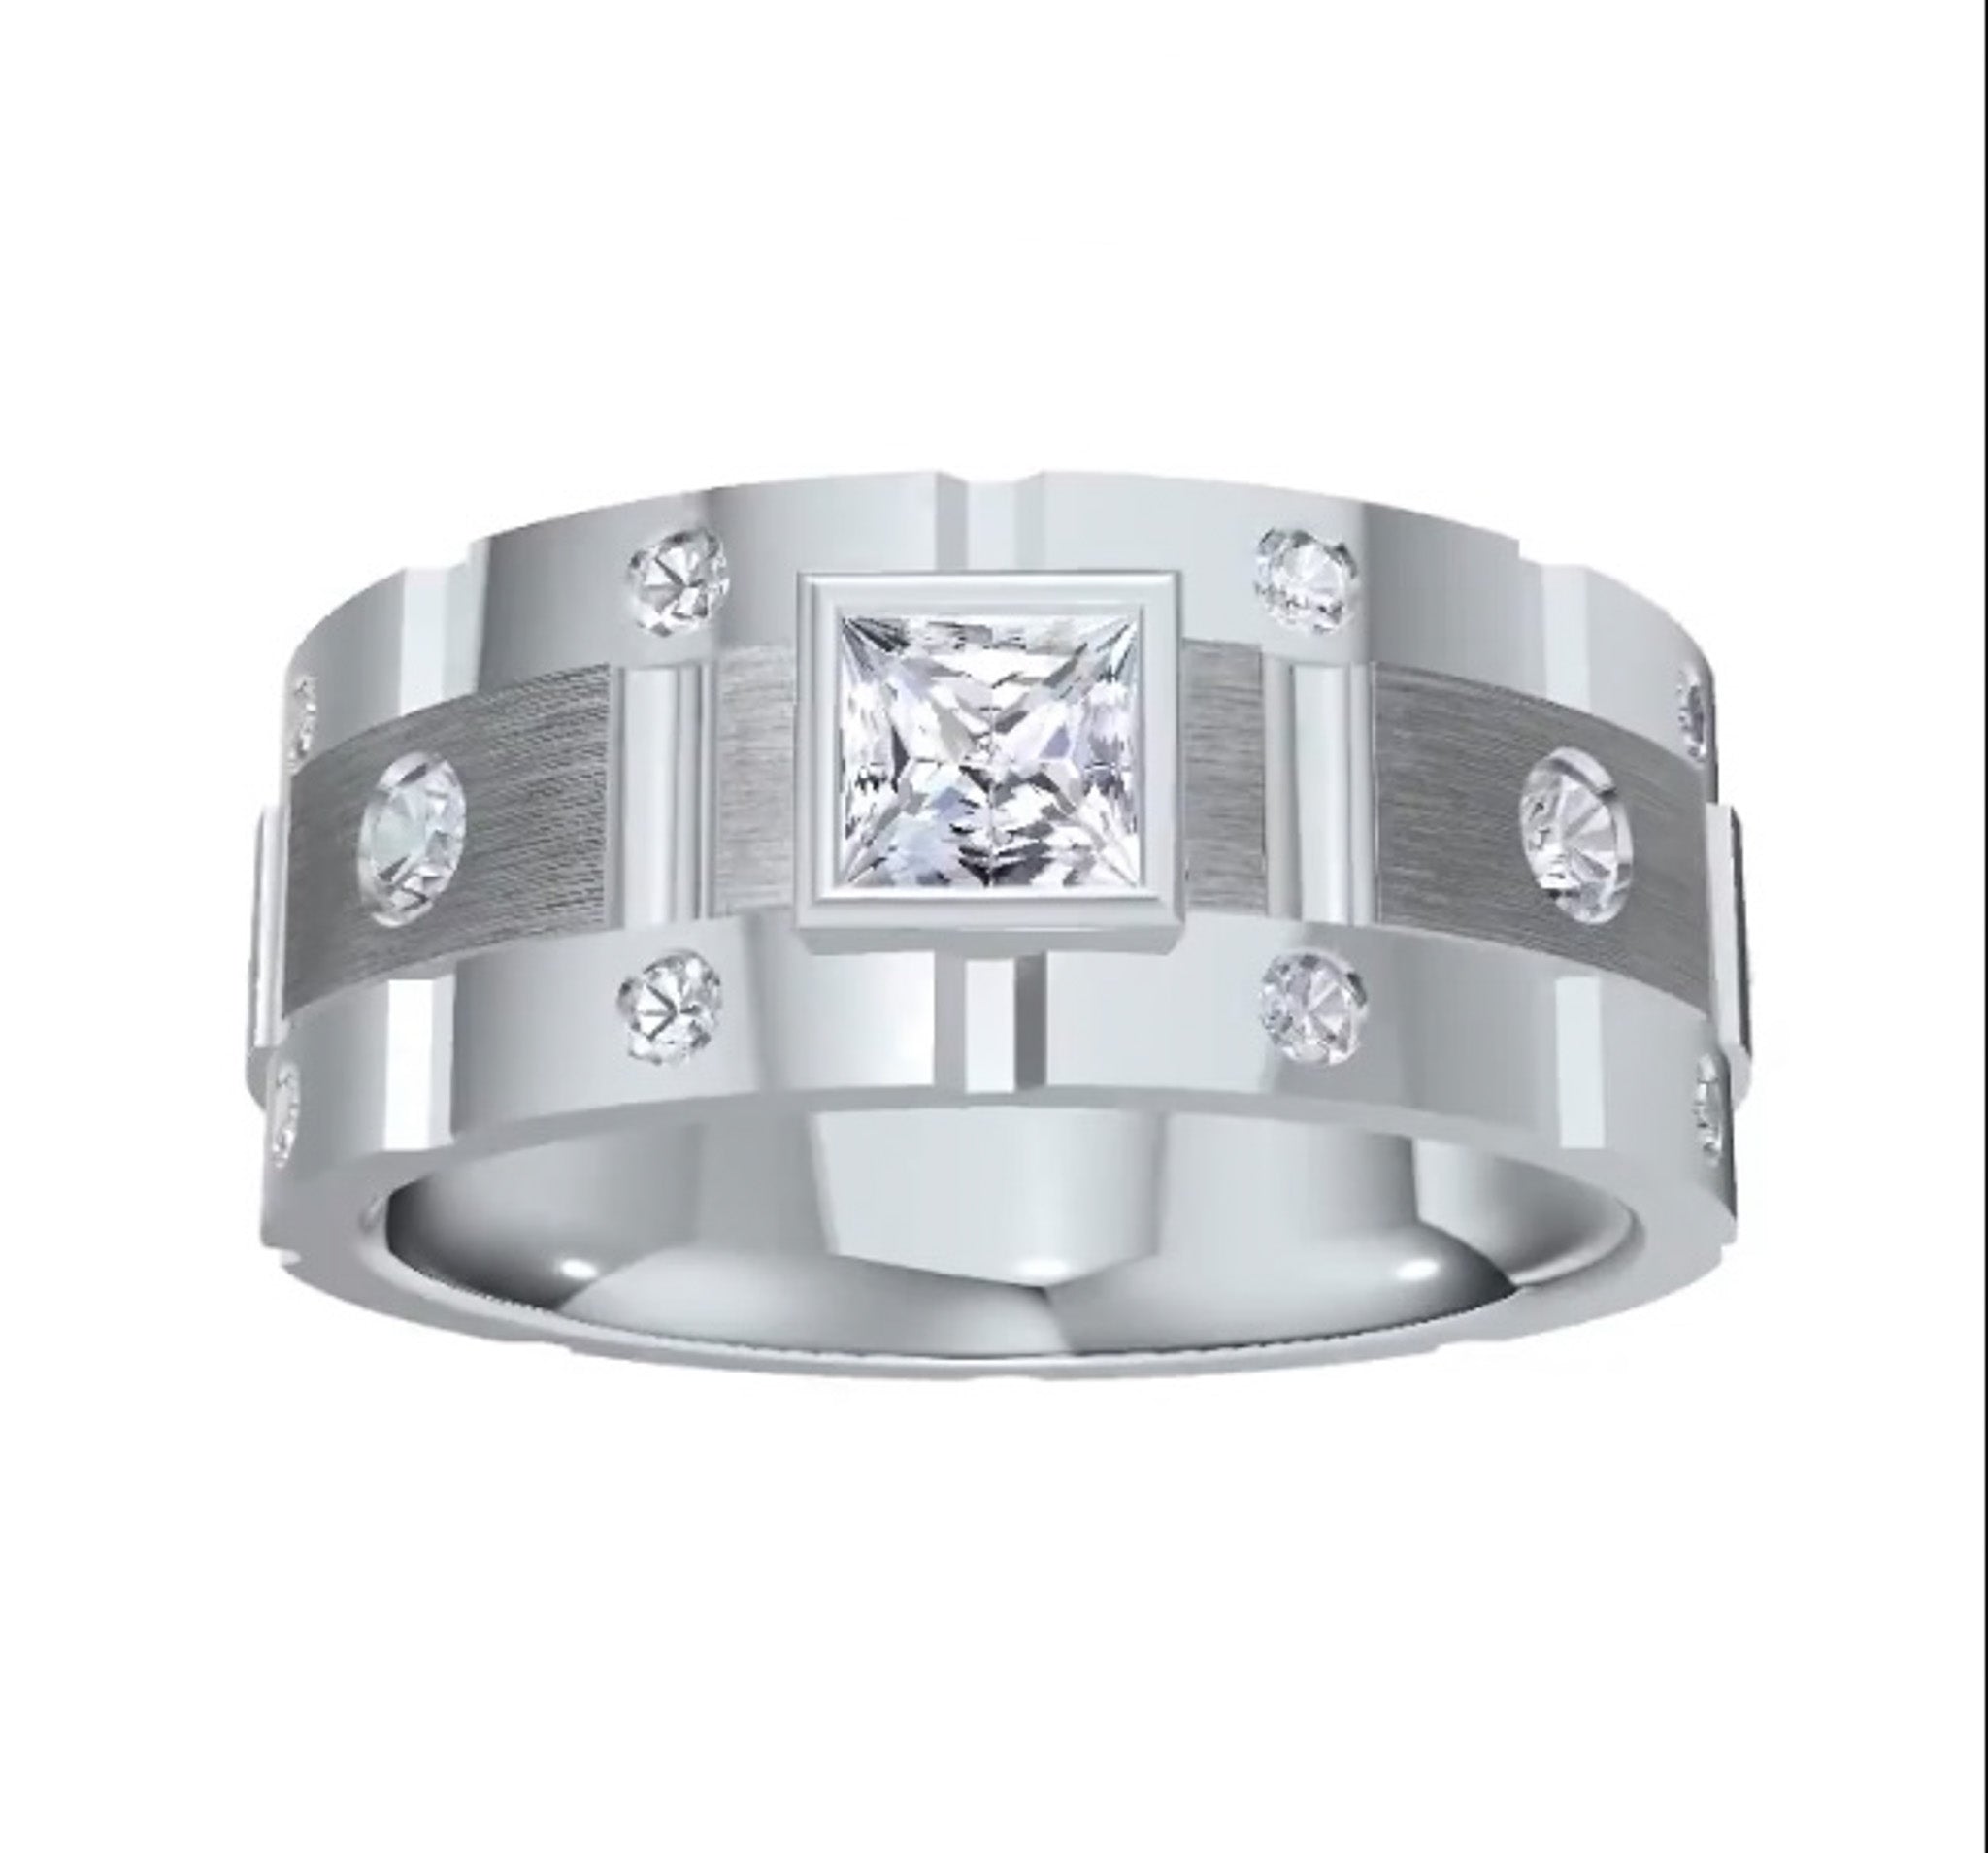 A 14kt white gold men's ring with bezel set diamonds and a princess cut center stone. It's name is "Leo."